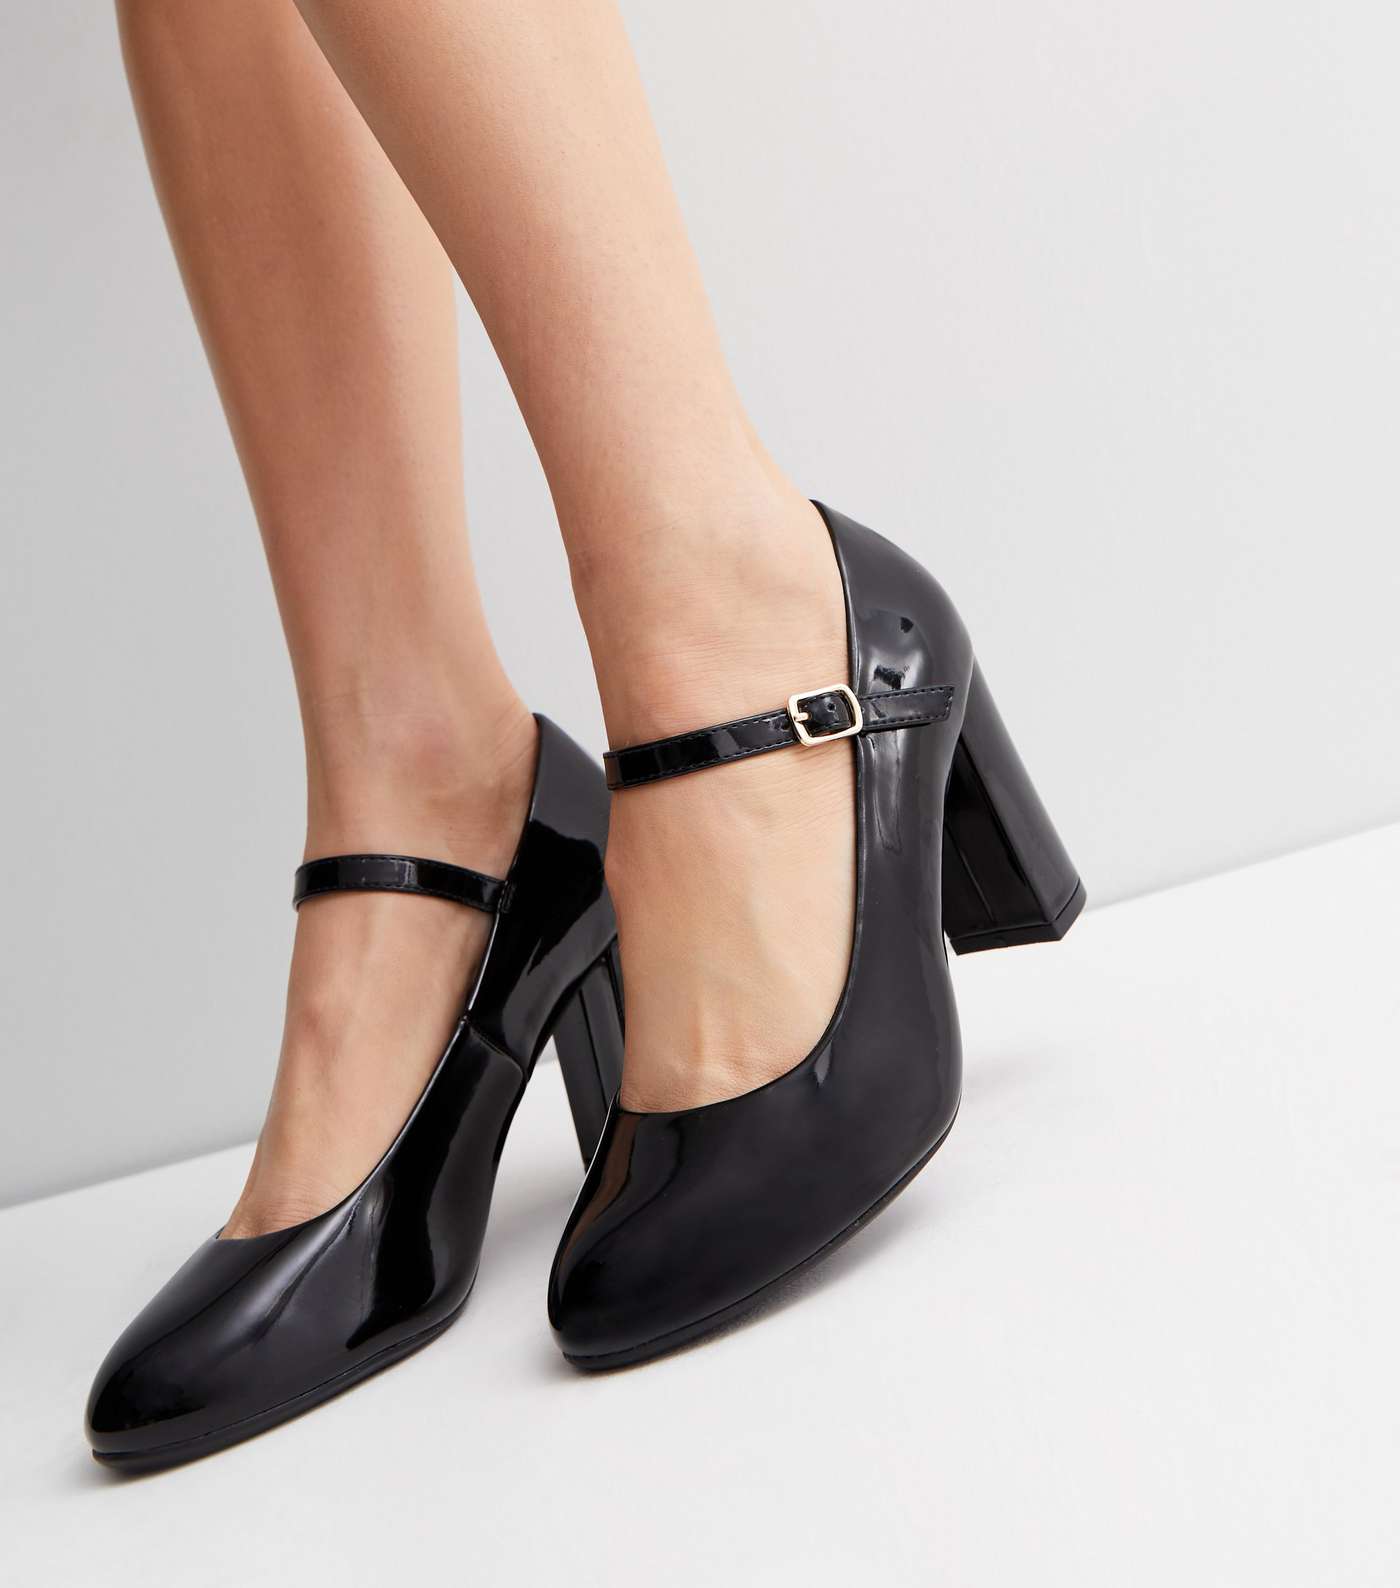 Wide Fit Black Patent Block Heel Mary Jane Shoes Image 2